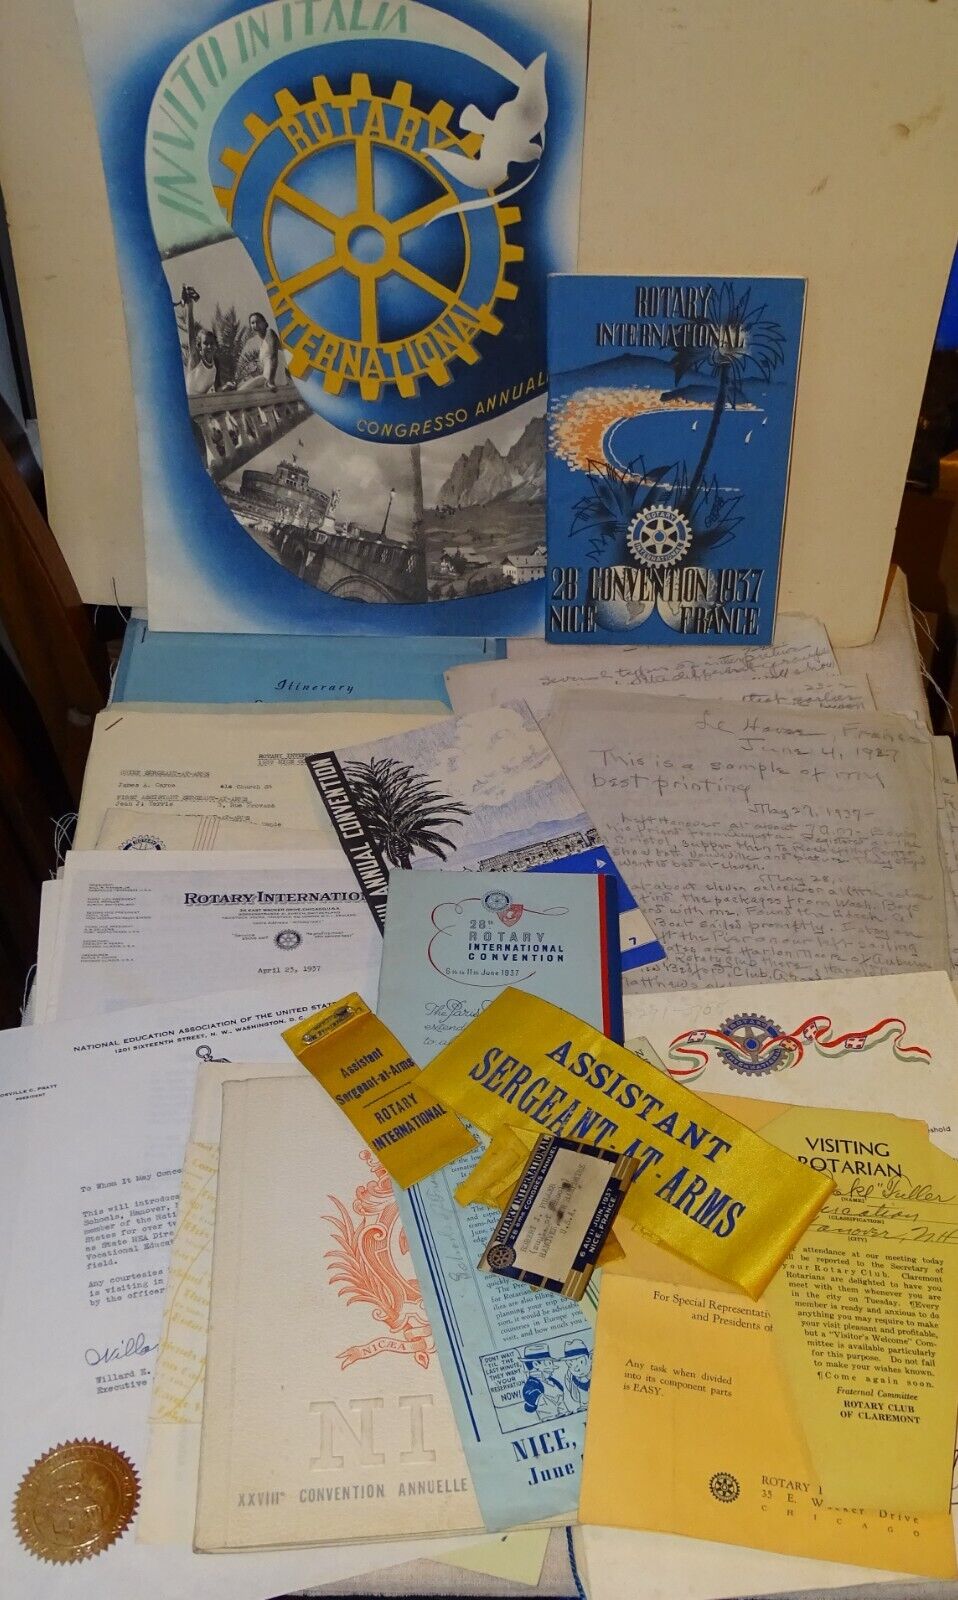 1937 Europe & Rotary Convention Nice France Trip - Hand Written Diary,Books,etc